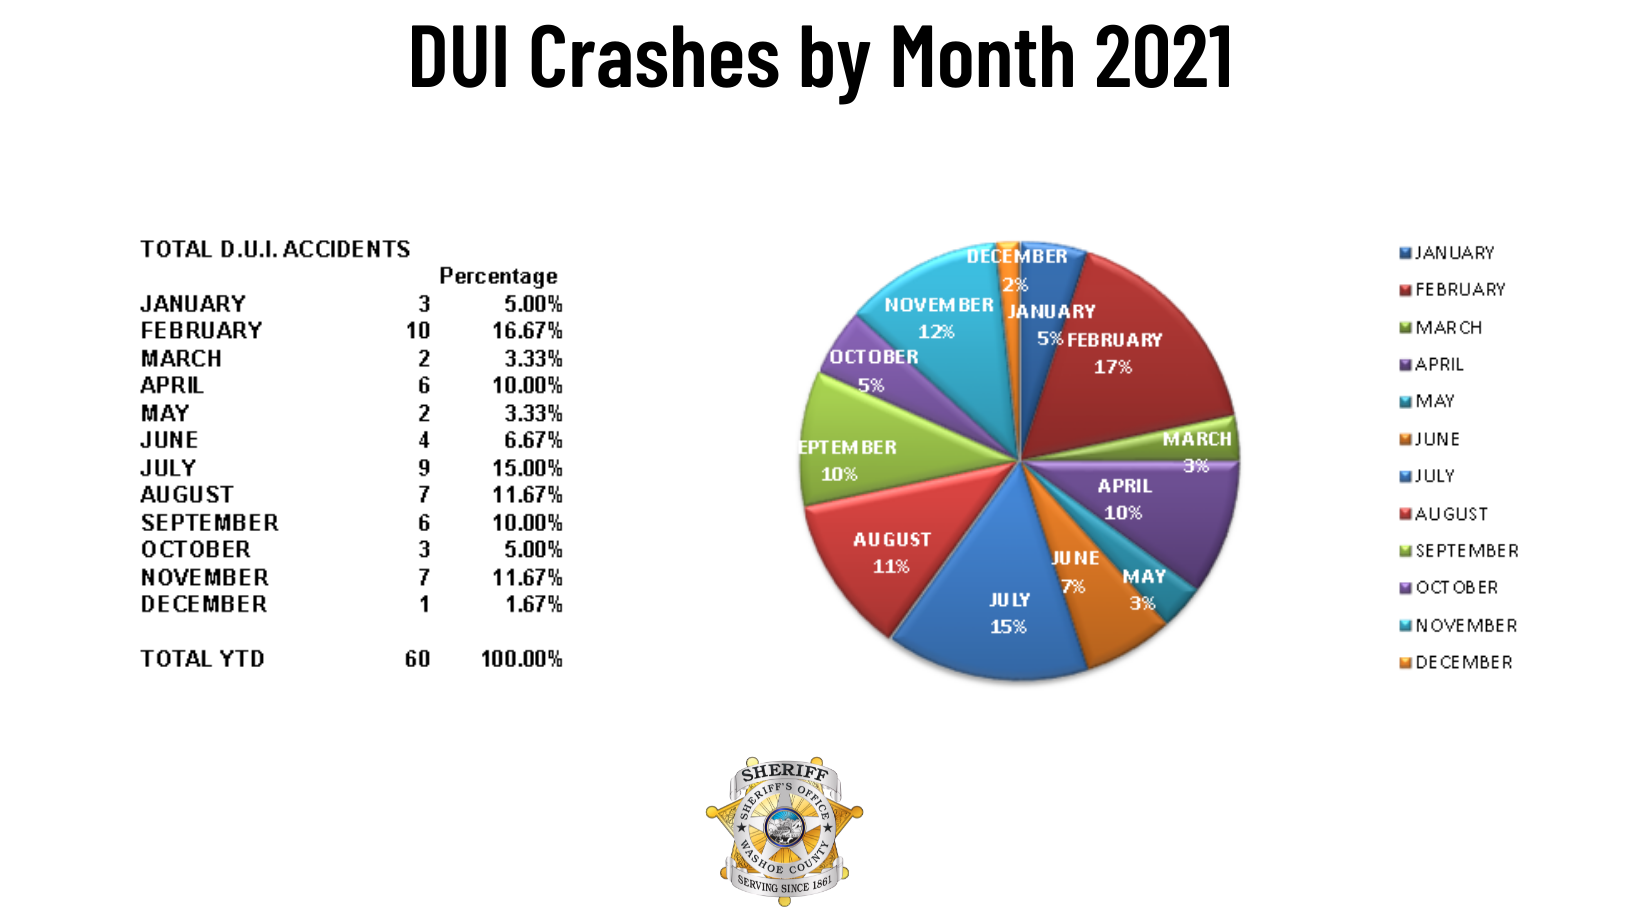 DUI-Crashes-by-Month-2021-CANVA.png